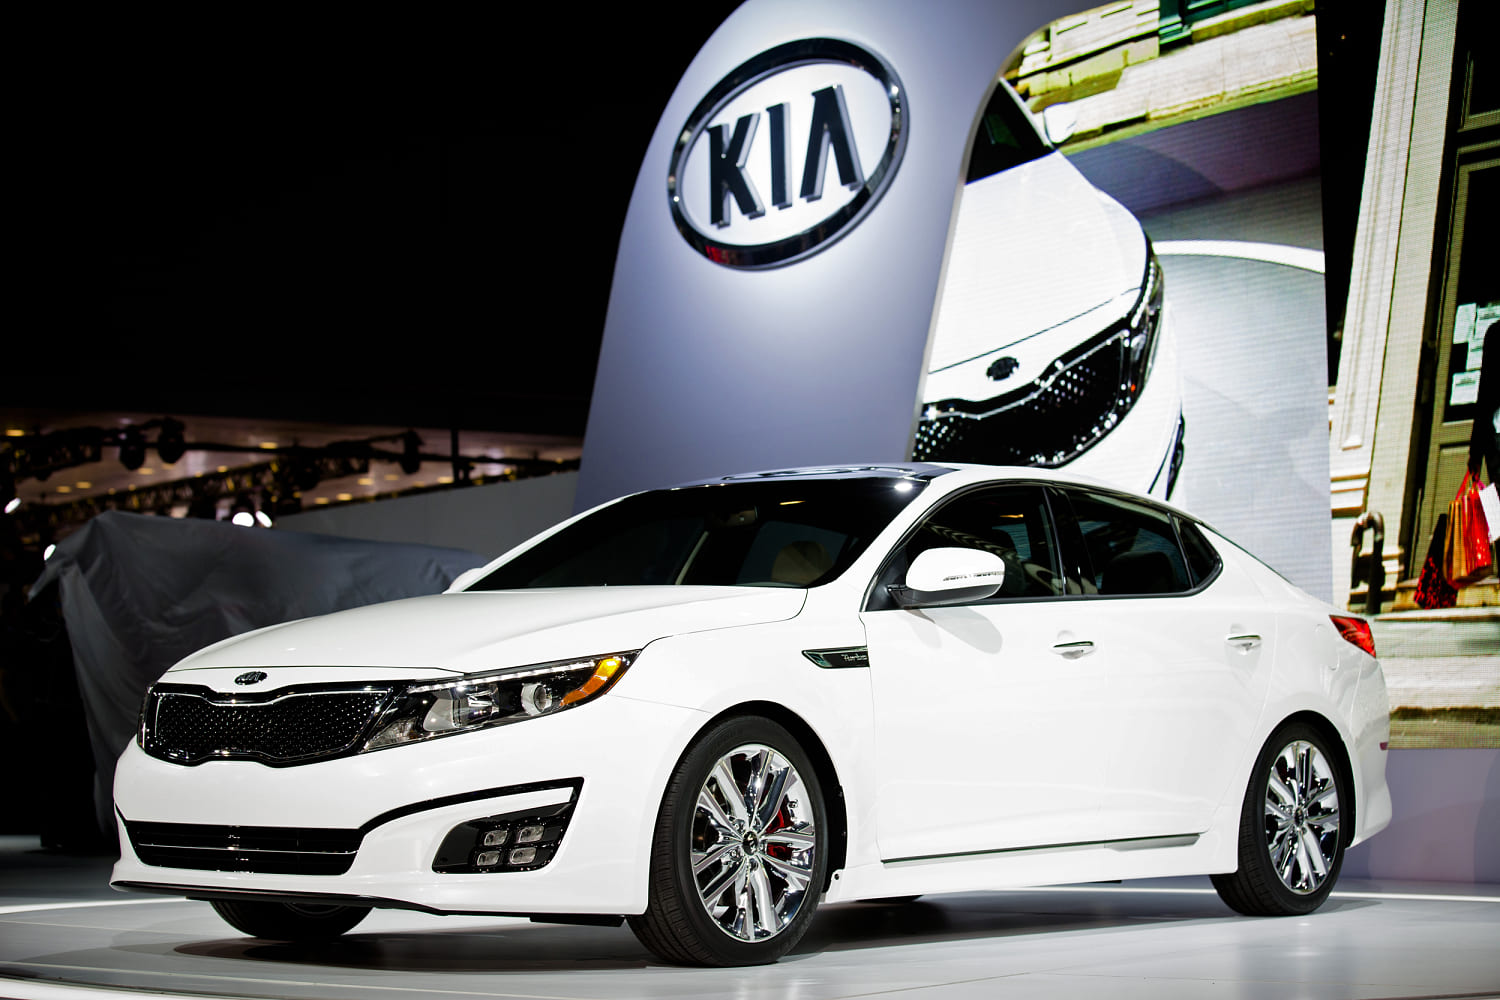 Kia and Hyundai recall 3.37 million vehicles in the U.S. over fire risks